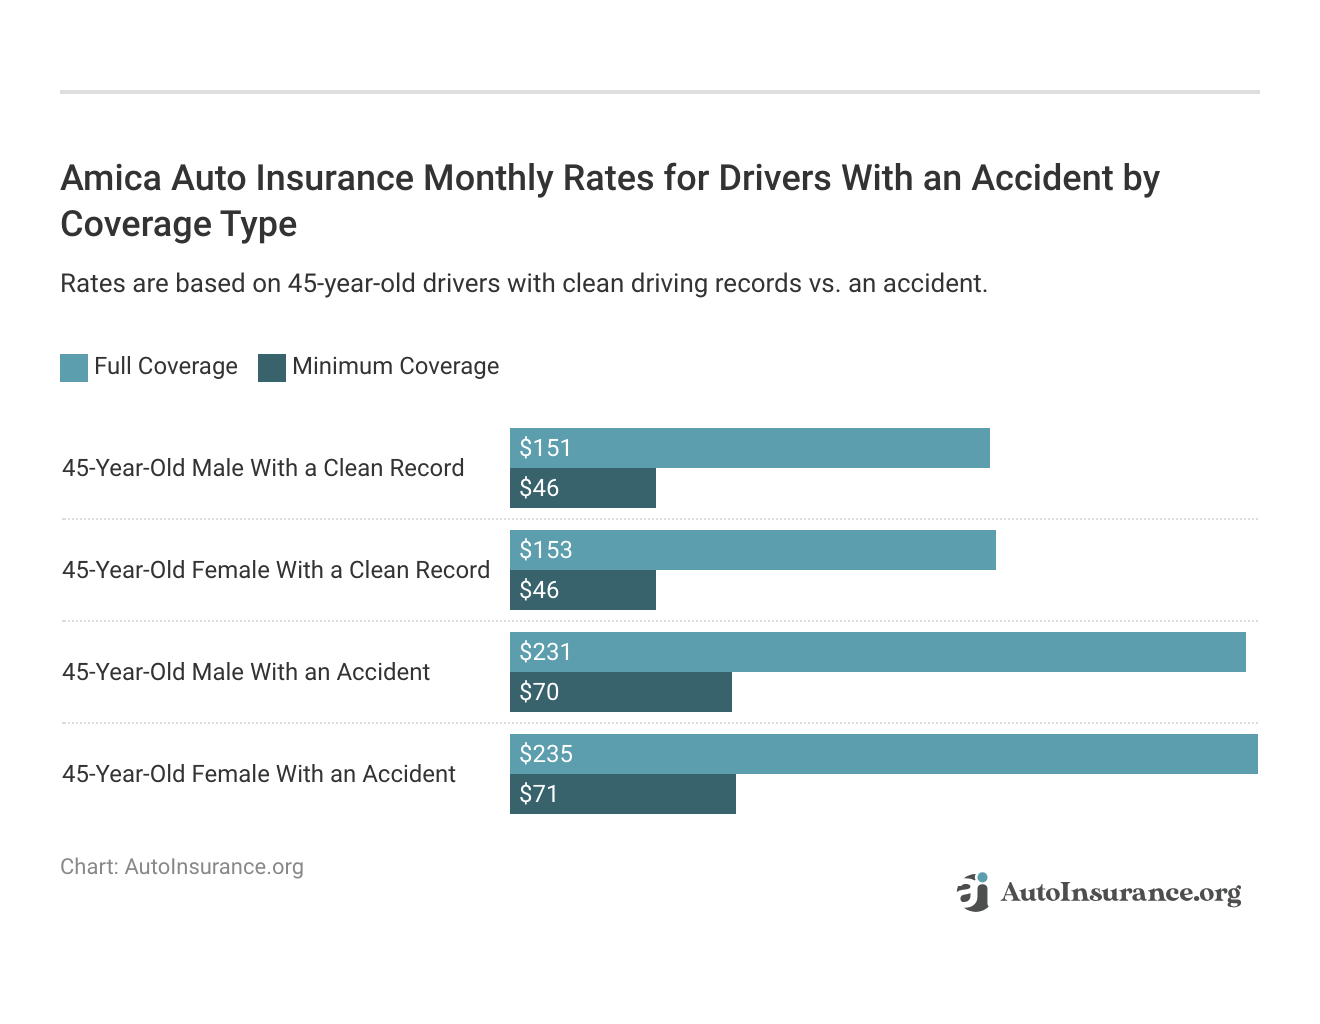 <h3>Amica Auto Insurance Monthly Rates for Drivers With an Accident by Coverage Type</h3>